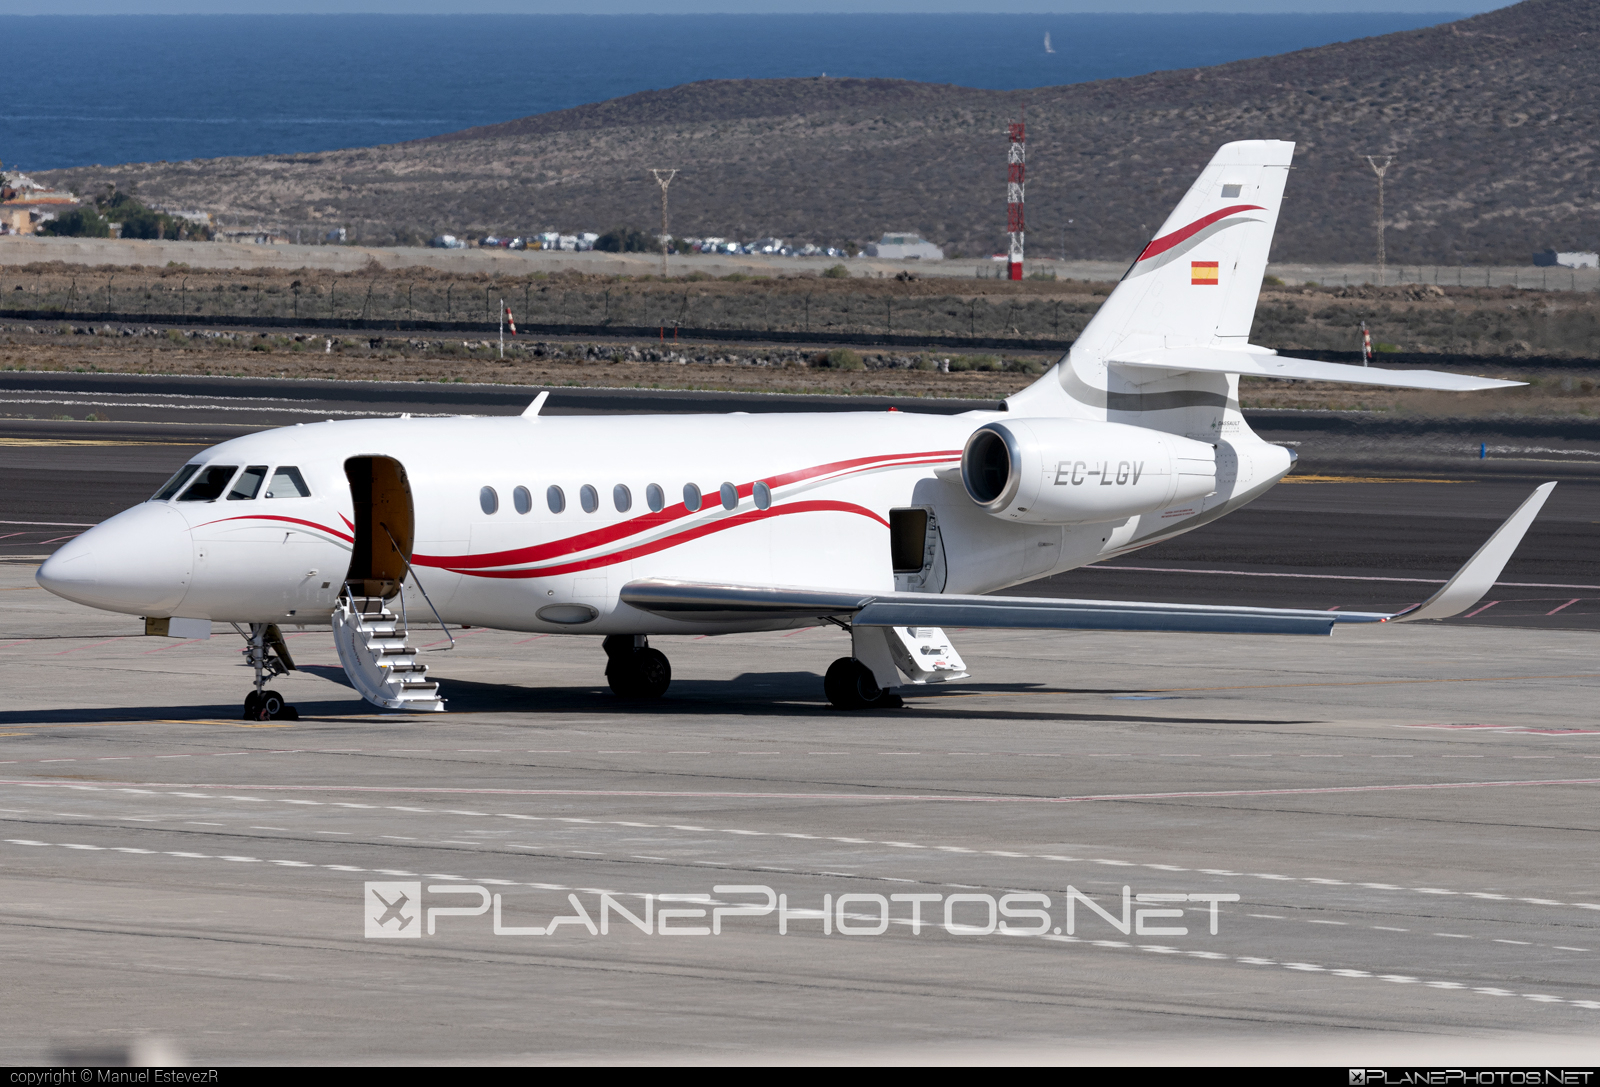 Dassault Falcon 2000LX - EC-LGV operated by Gestair #dassault #dassaultfalcon #dassaultfalcon2000 #dassaultfalcon2000lx #falcon2000 #falcon2000lx